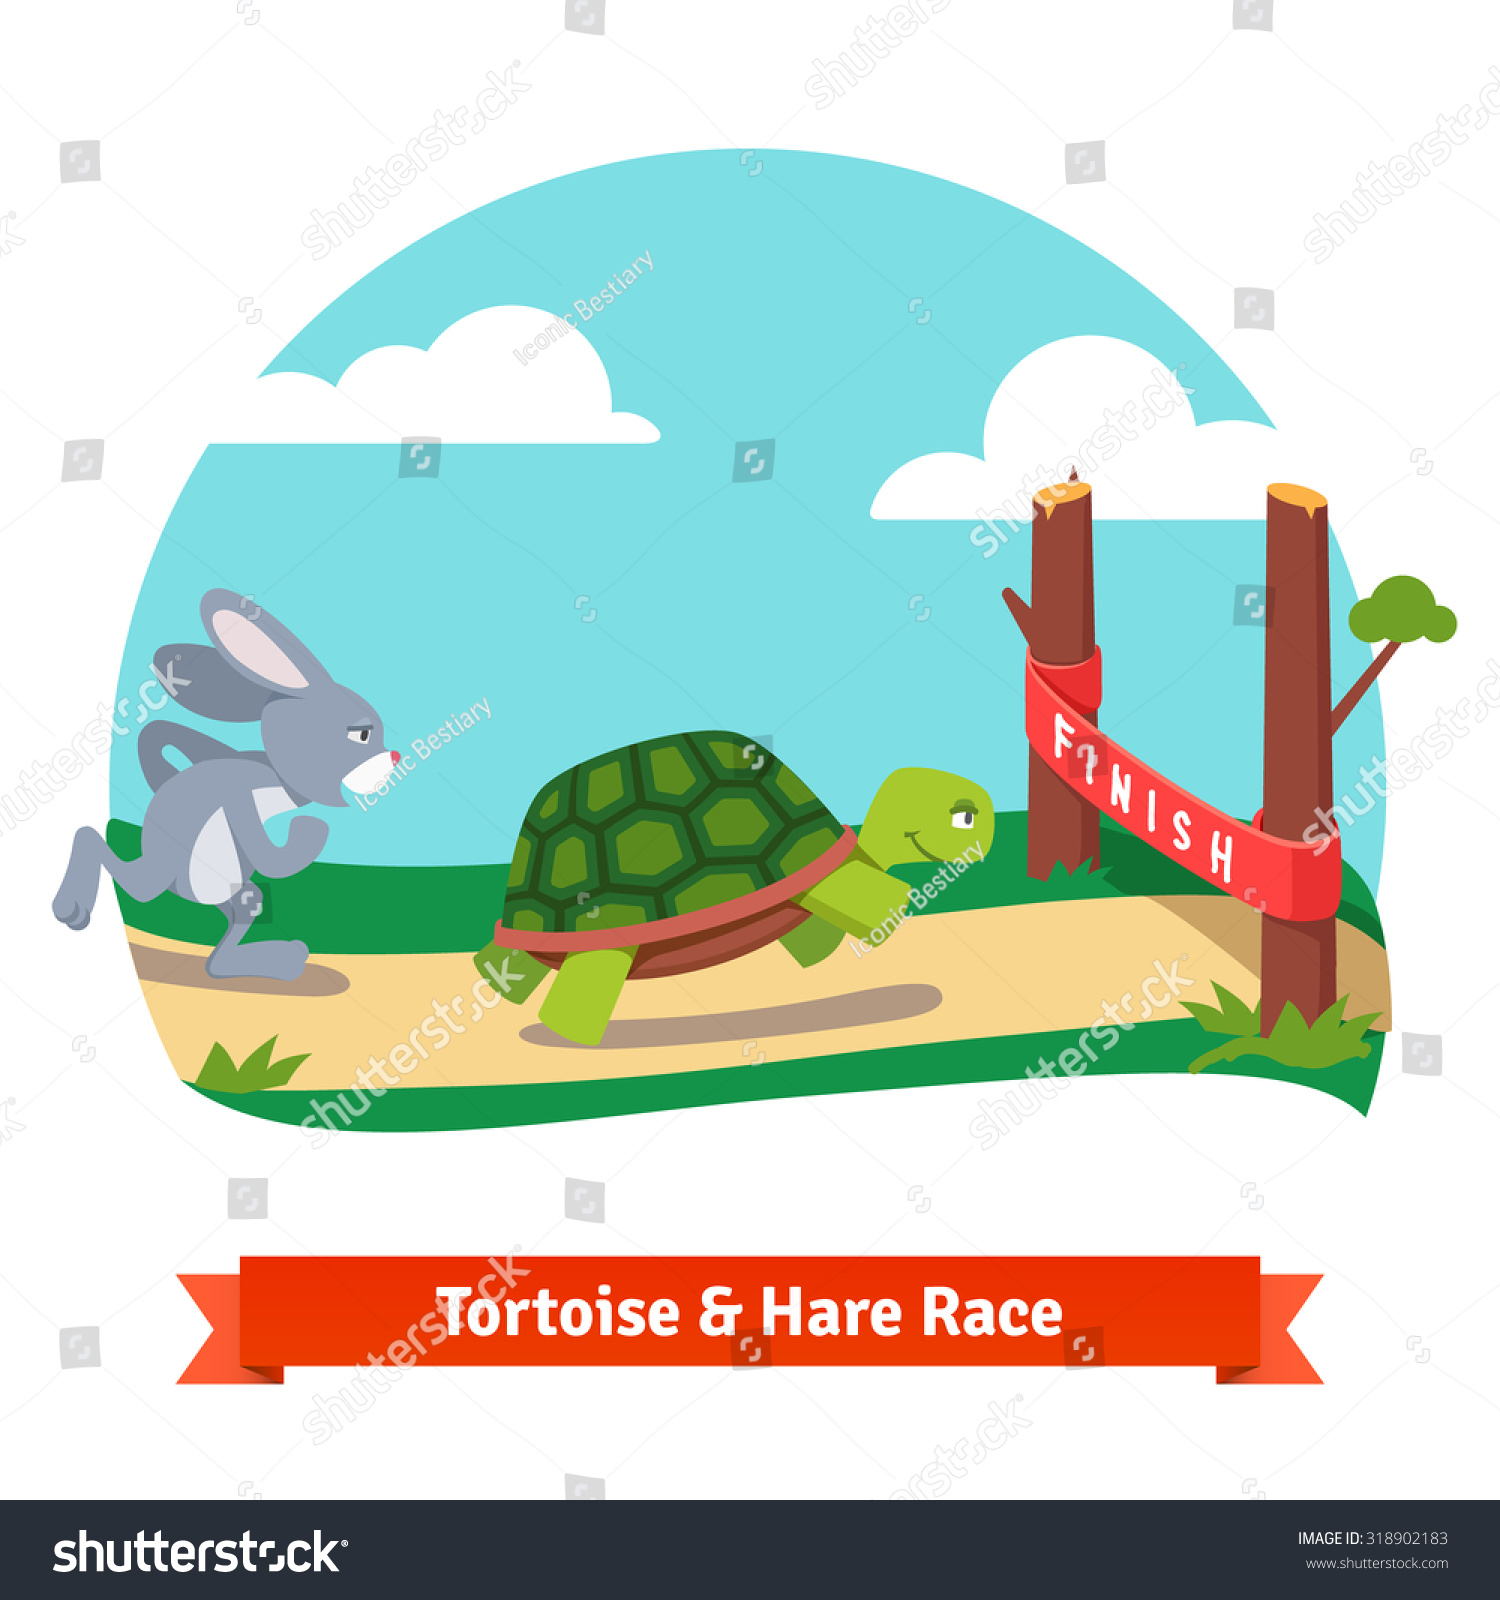 Hare And Tortoise Story Video Free Download